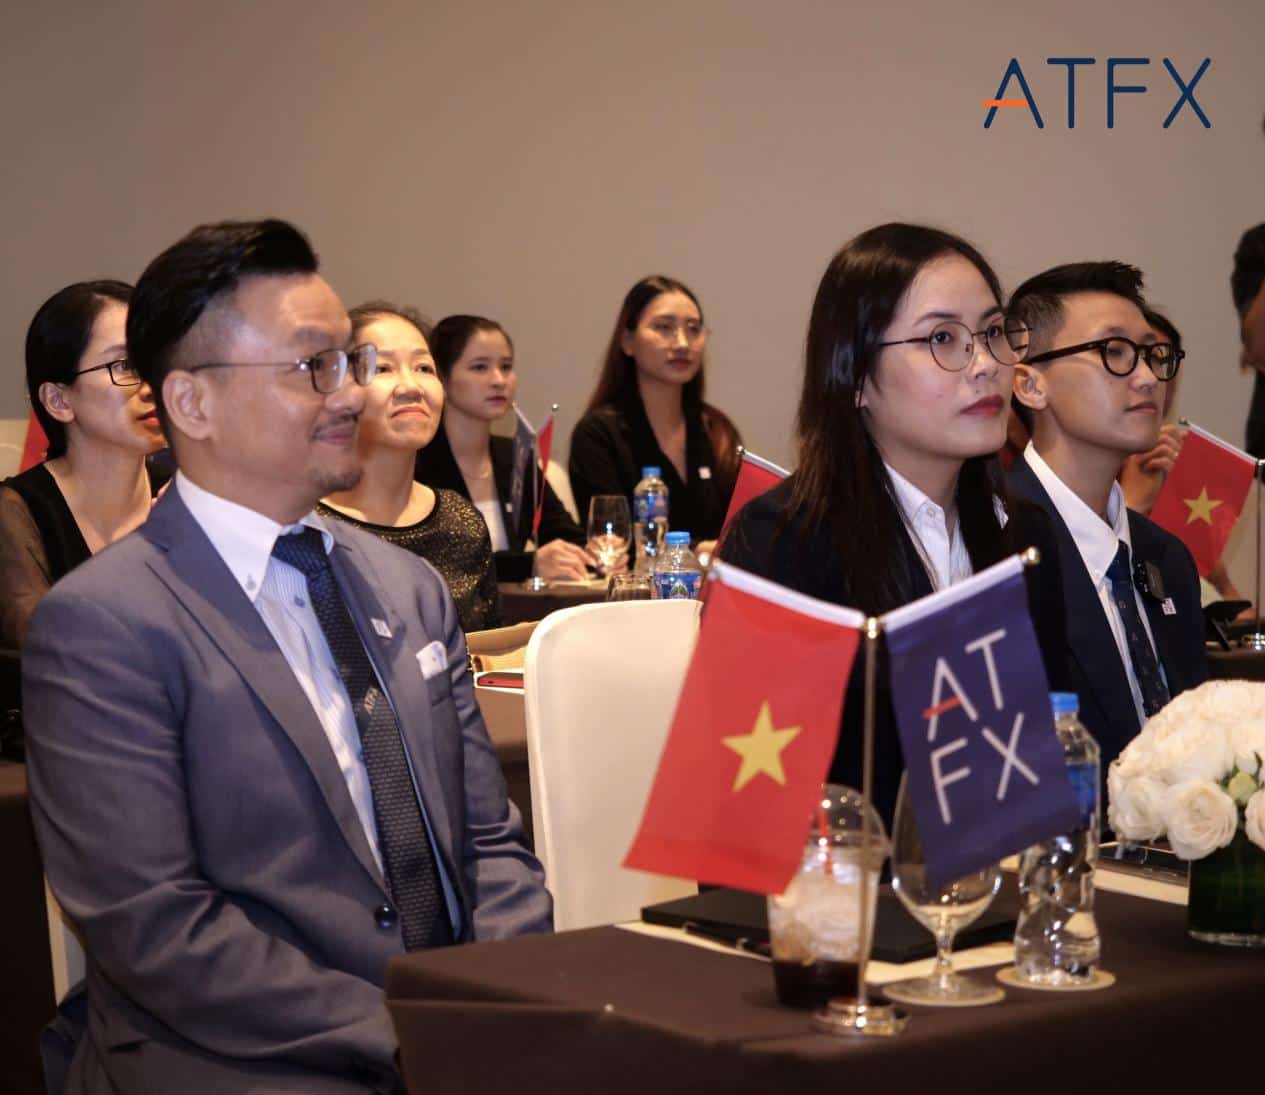 BOSSPlan to open a new chapter,ATFXOpening a New Chapter in the Education Investment Plan: Entering Vietnam686 / author:atfx2019 / PostsID:1726756